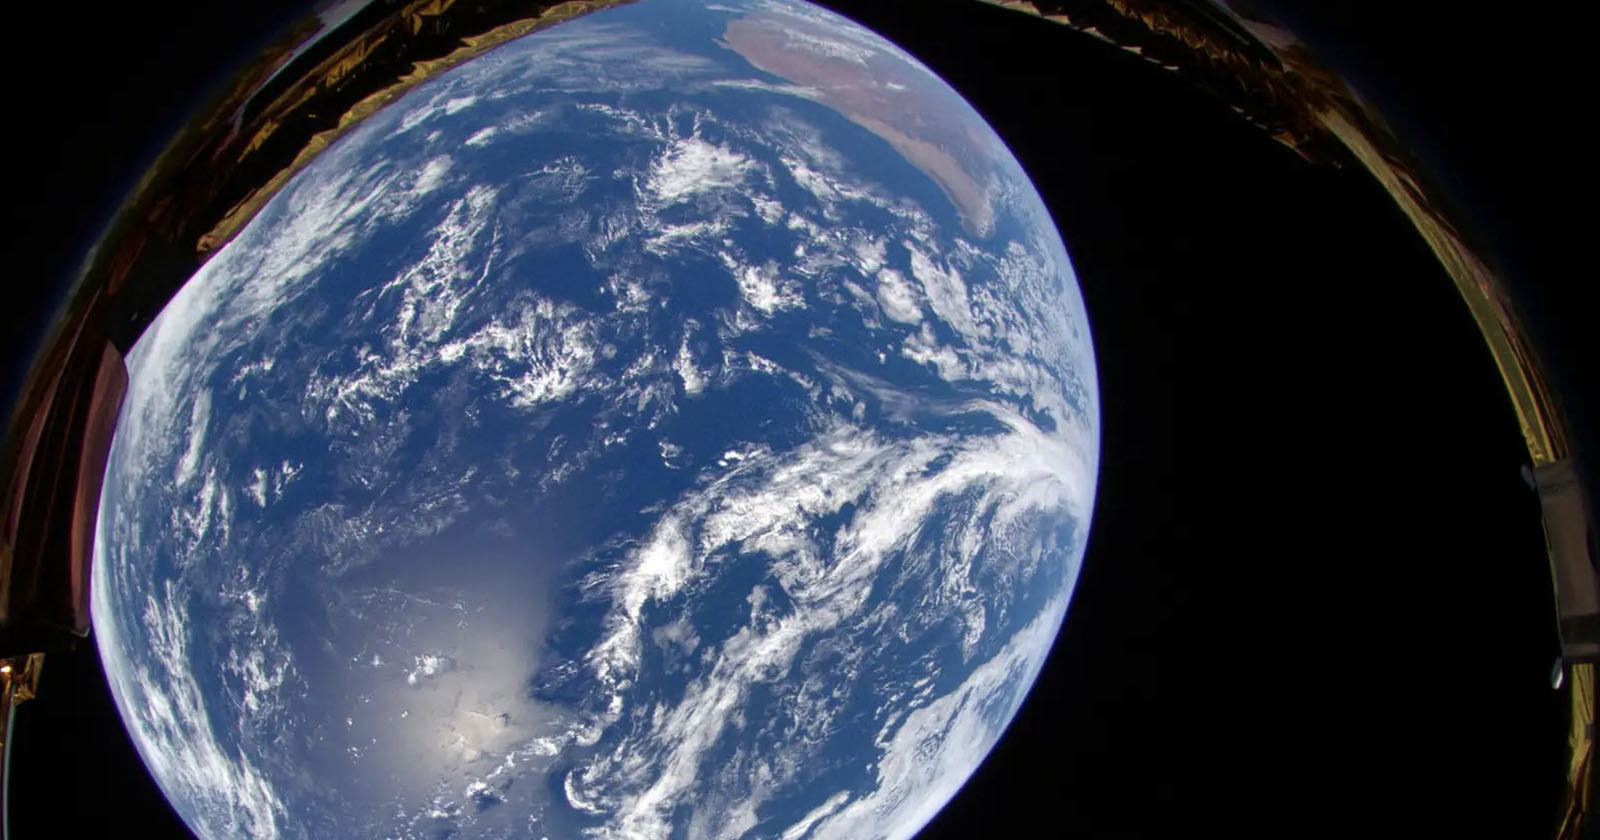 Japans Private Moon Mission Captures Awe-Inspiring Photo of Earth